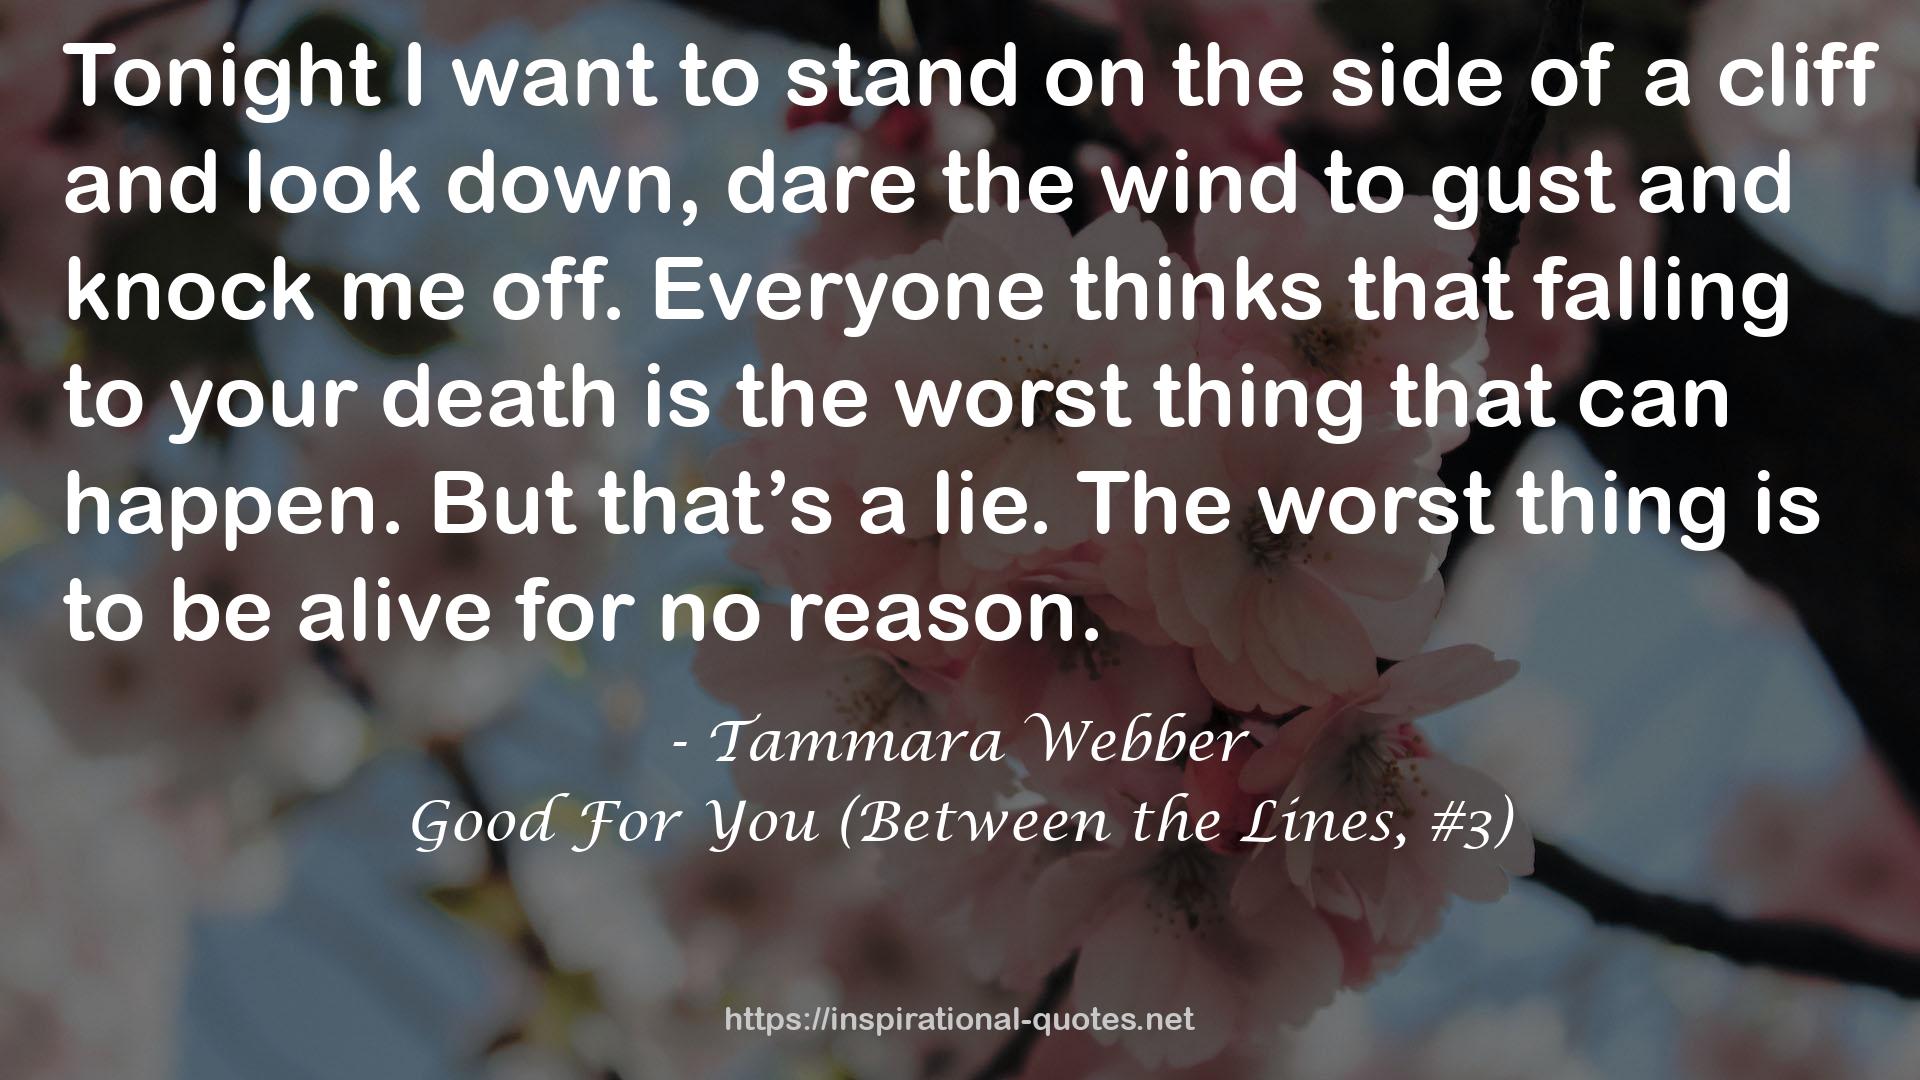 Good For You (Between the Lines, #3) QUOTES